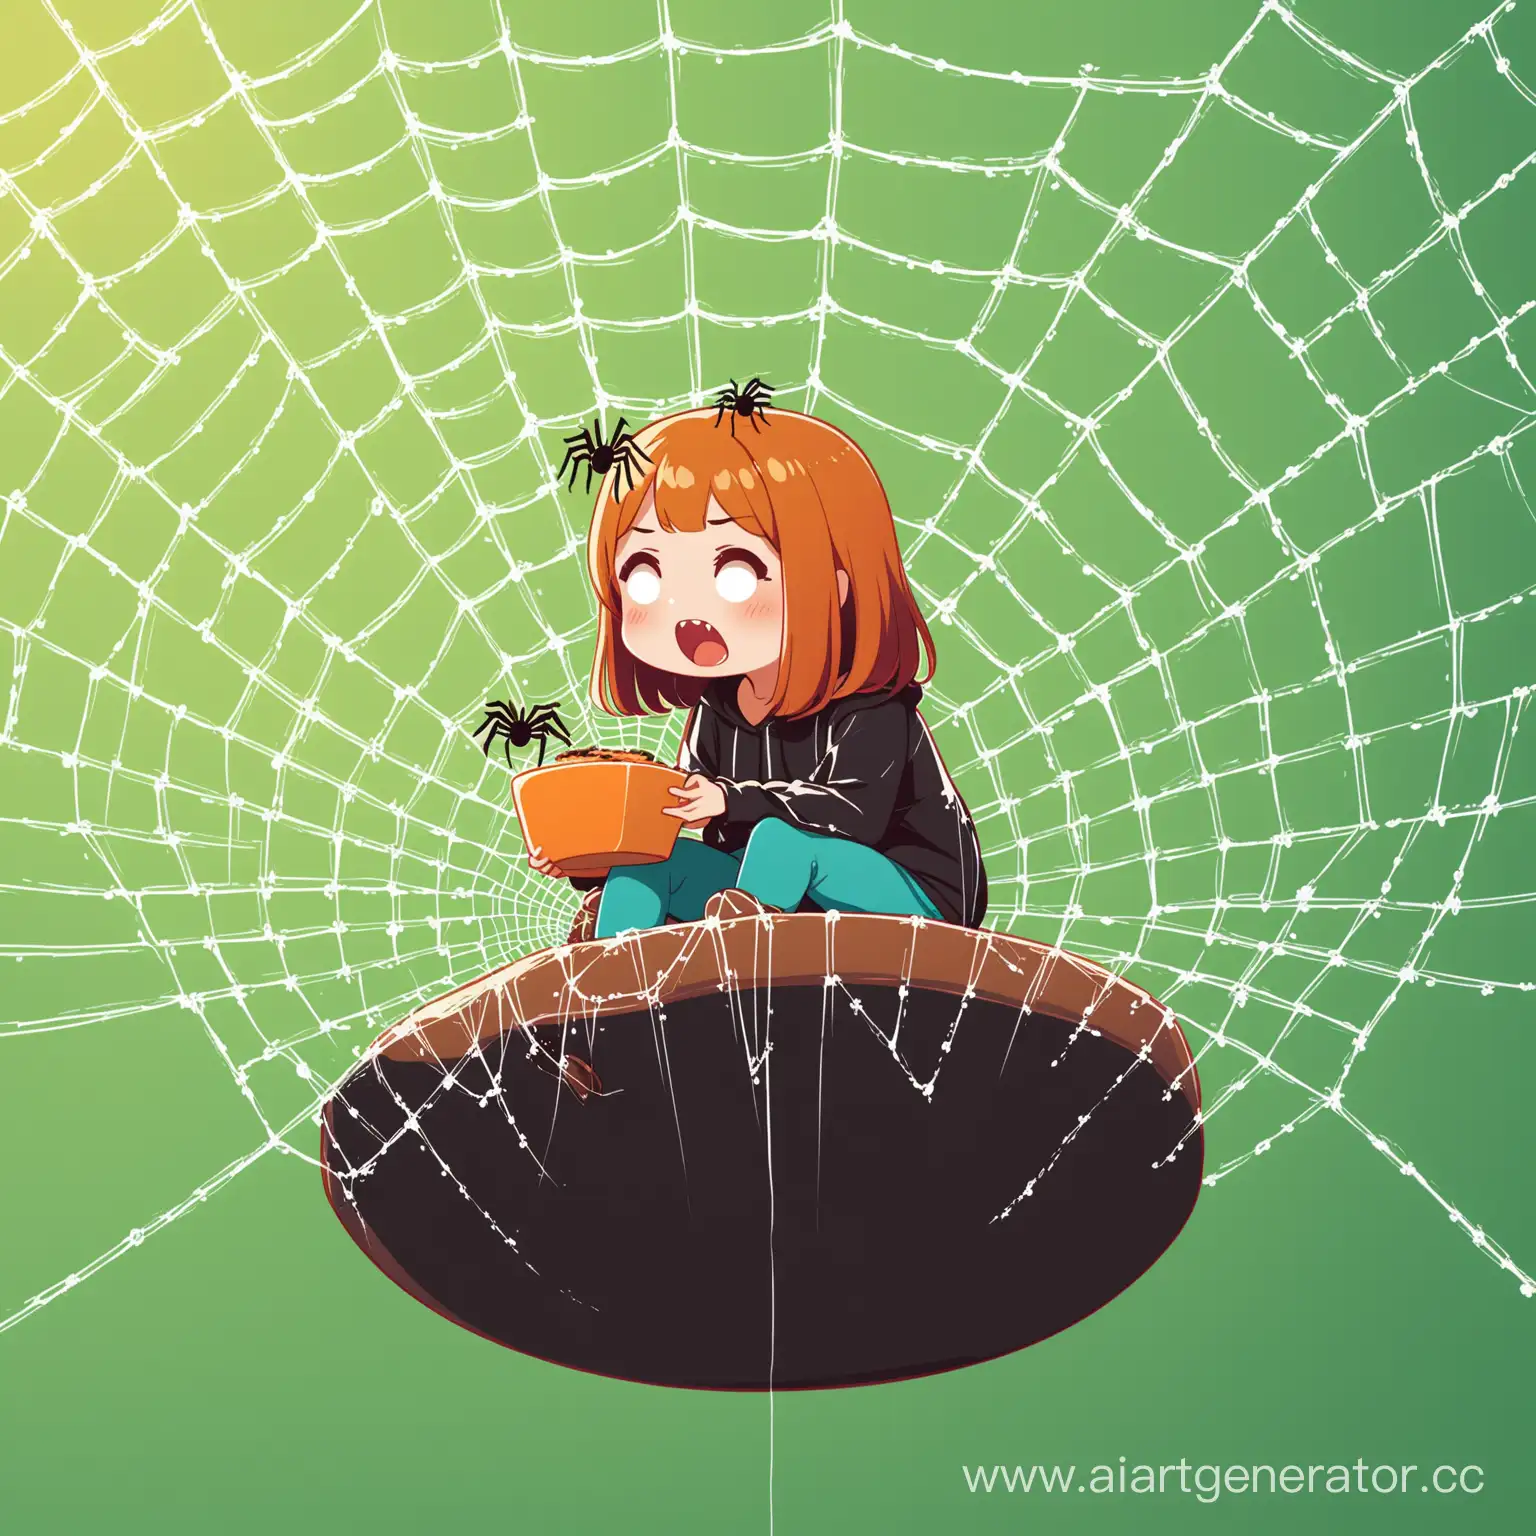 Spider-Eating-Human-on-Intricate-Web